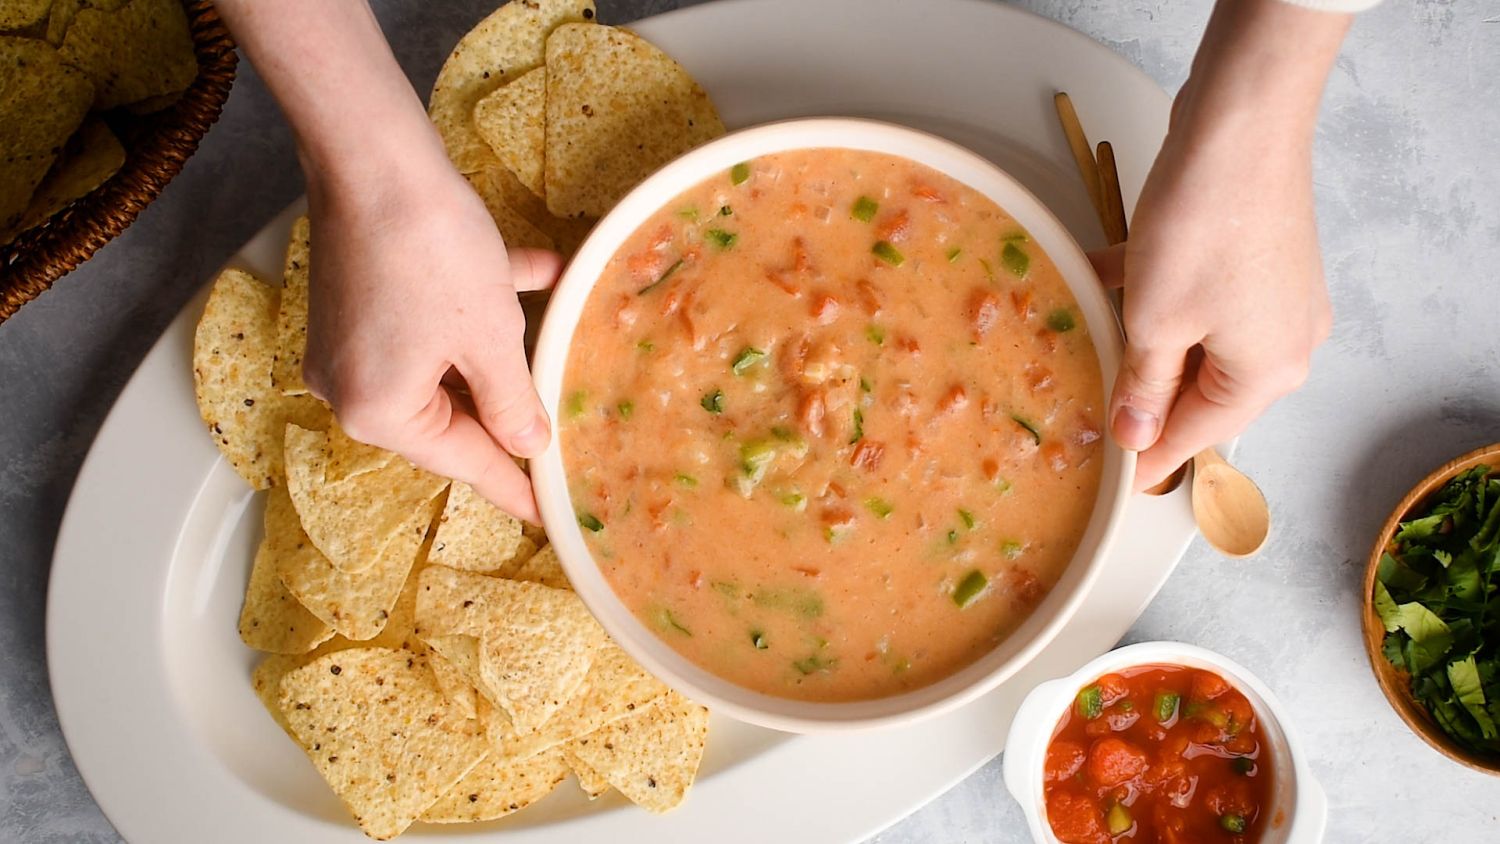 Lightened up cheddar queso dip in a bowl with two hands holding it and tortilla chips.